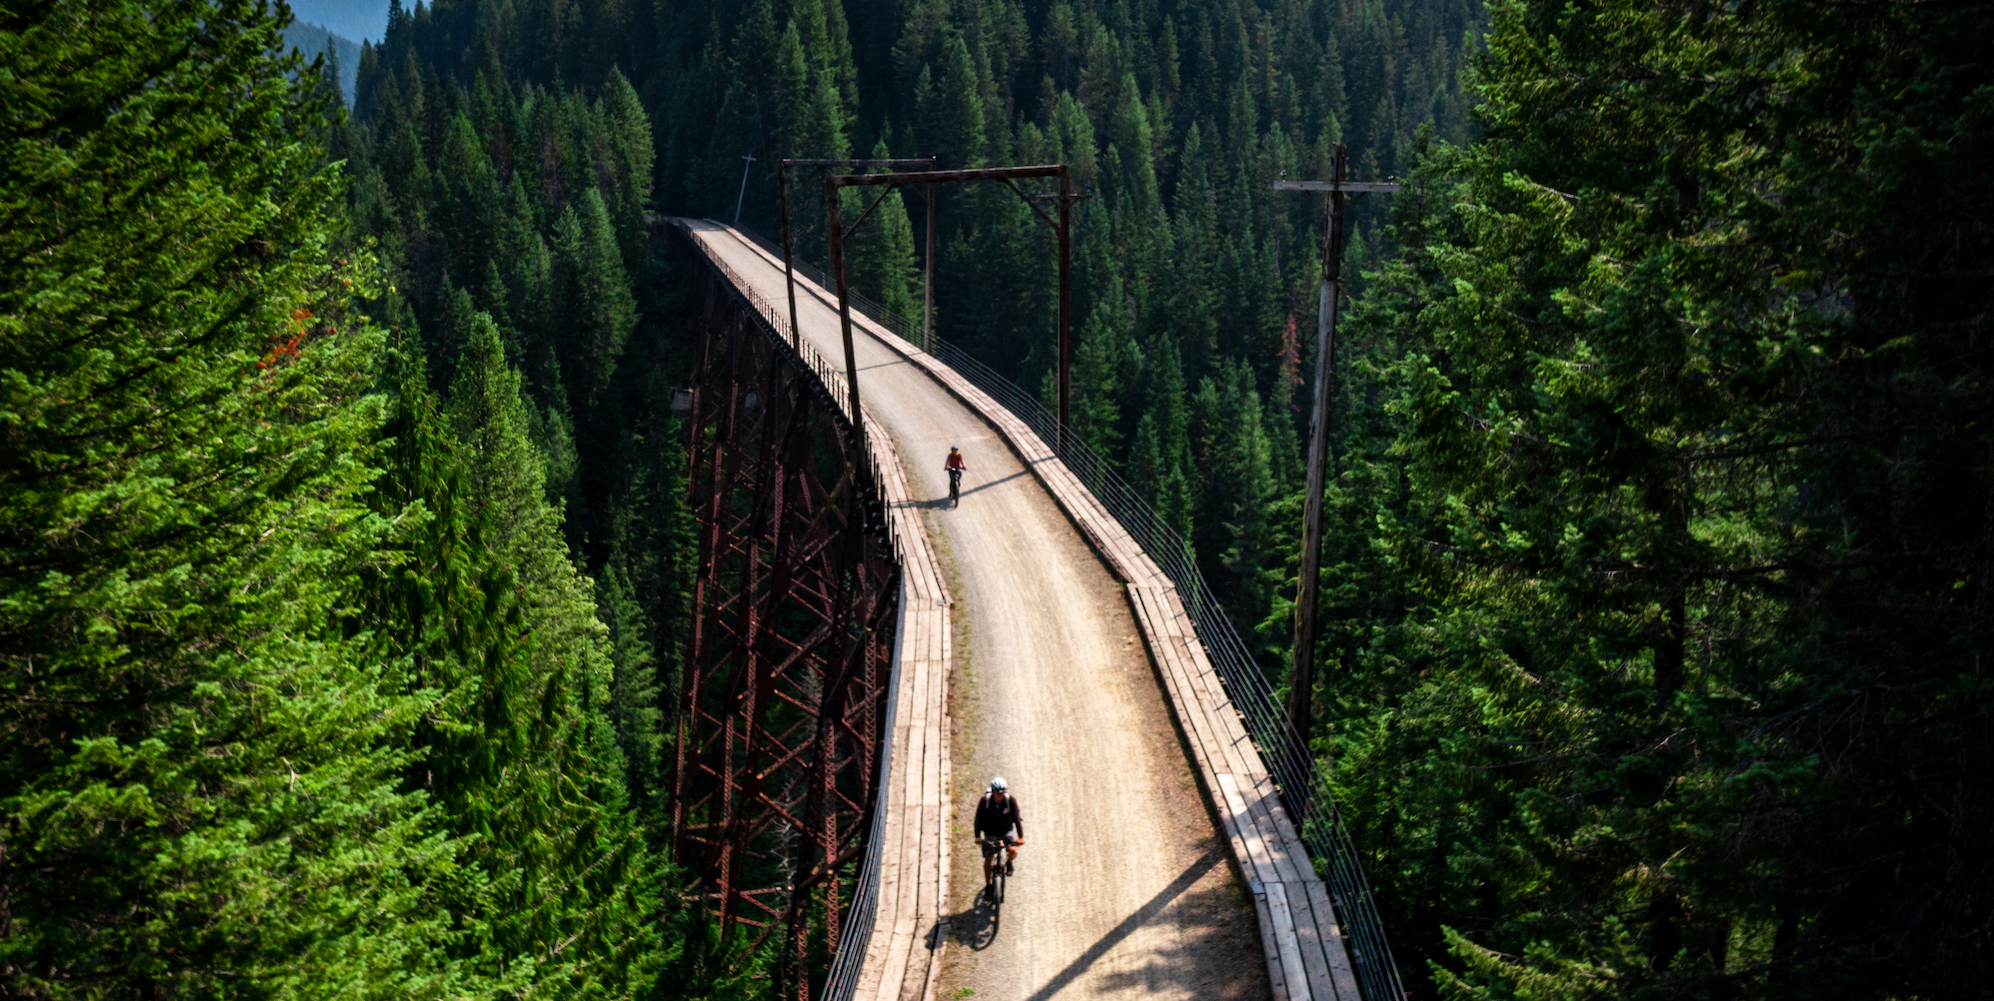 Two people biking on a large bridge in a dense forest in Northern Idaho